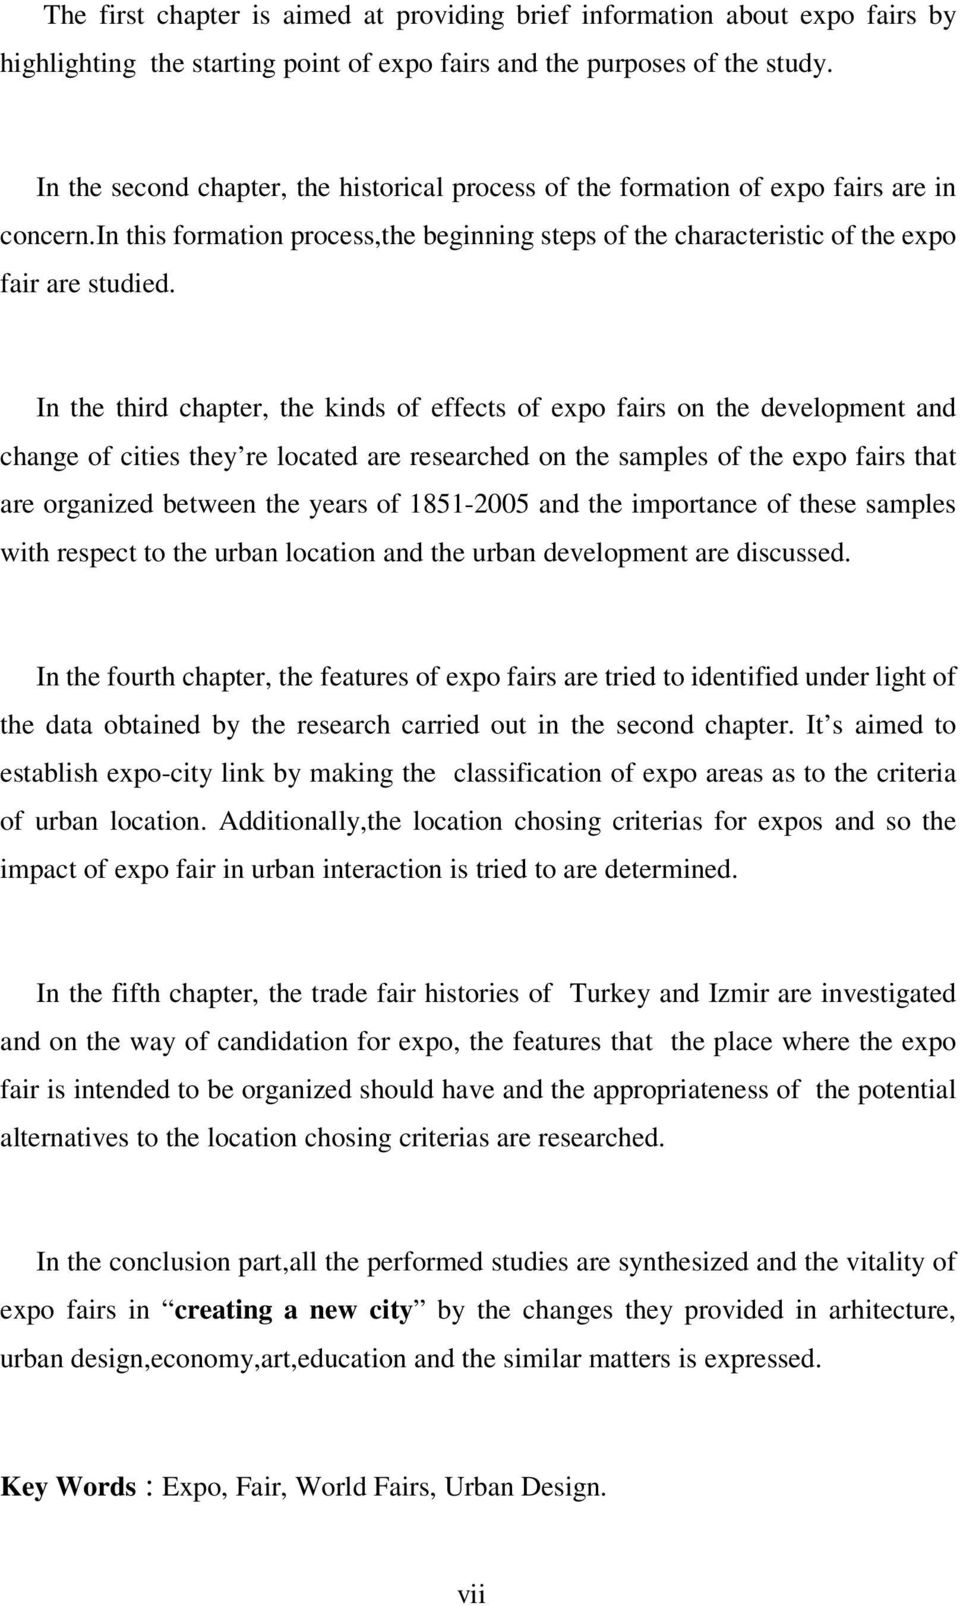 In the third chapter, the kinds of effects of expo fairs on the development and change of cities they re located are researched on the samples of the expo fairs that are organized between the years